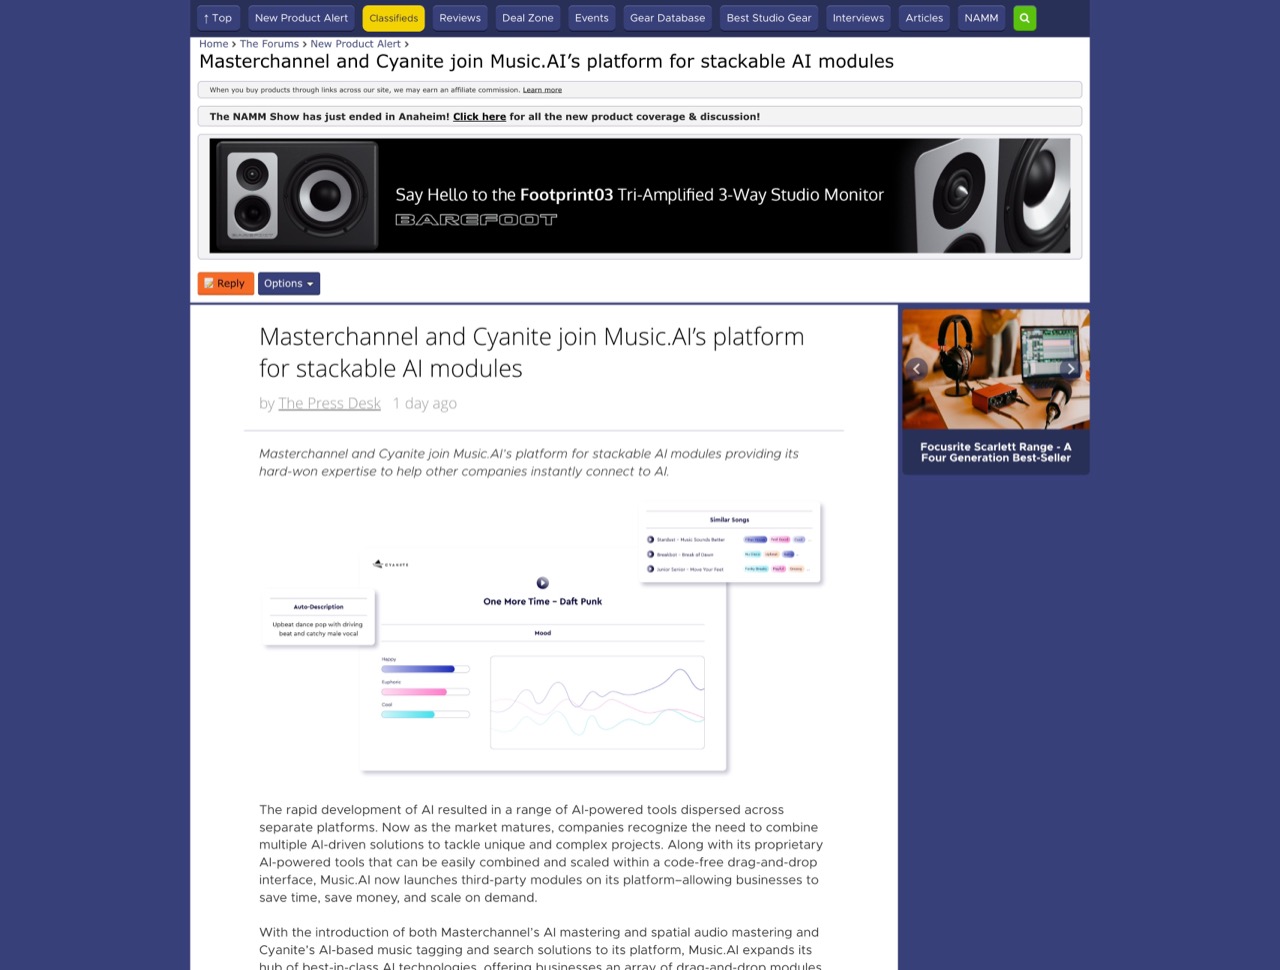 Masterchannel and Cyanite join Music.AI’s platform for stackable AI modules - Gearspace